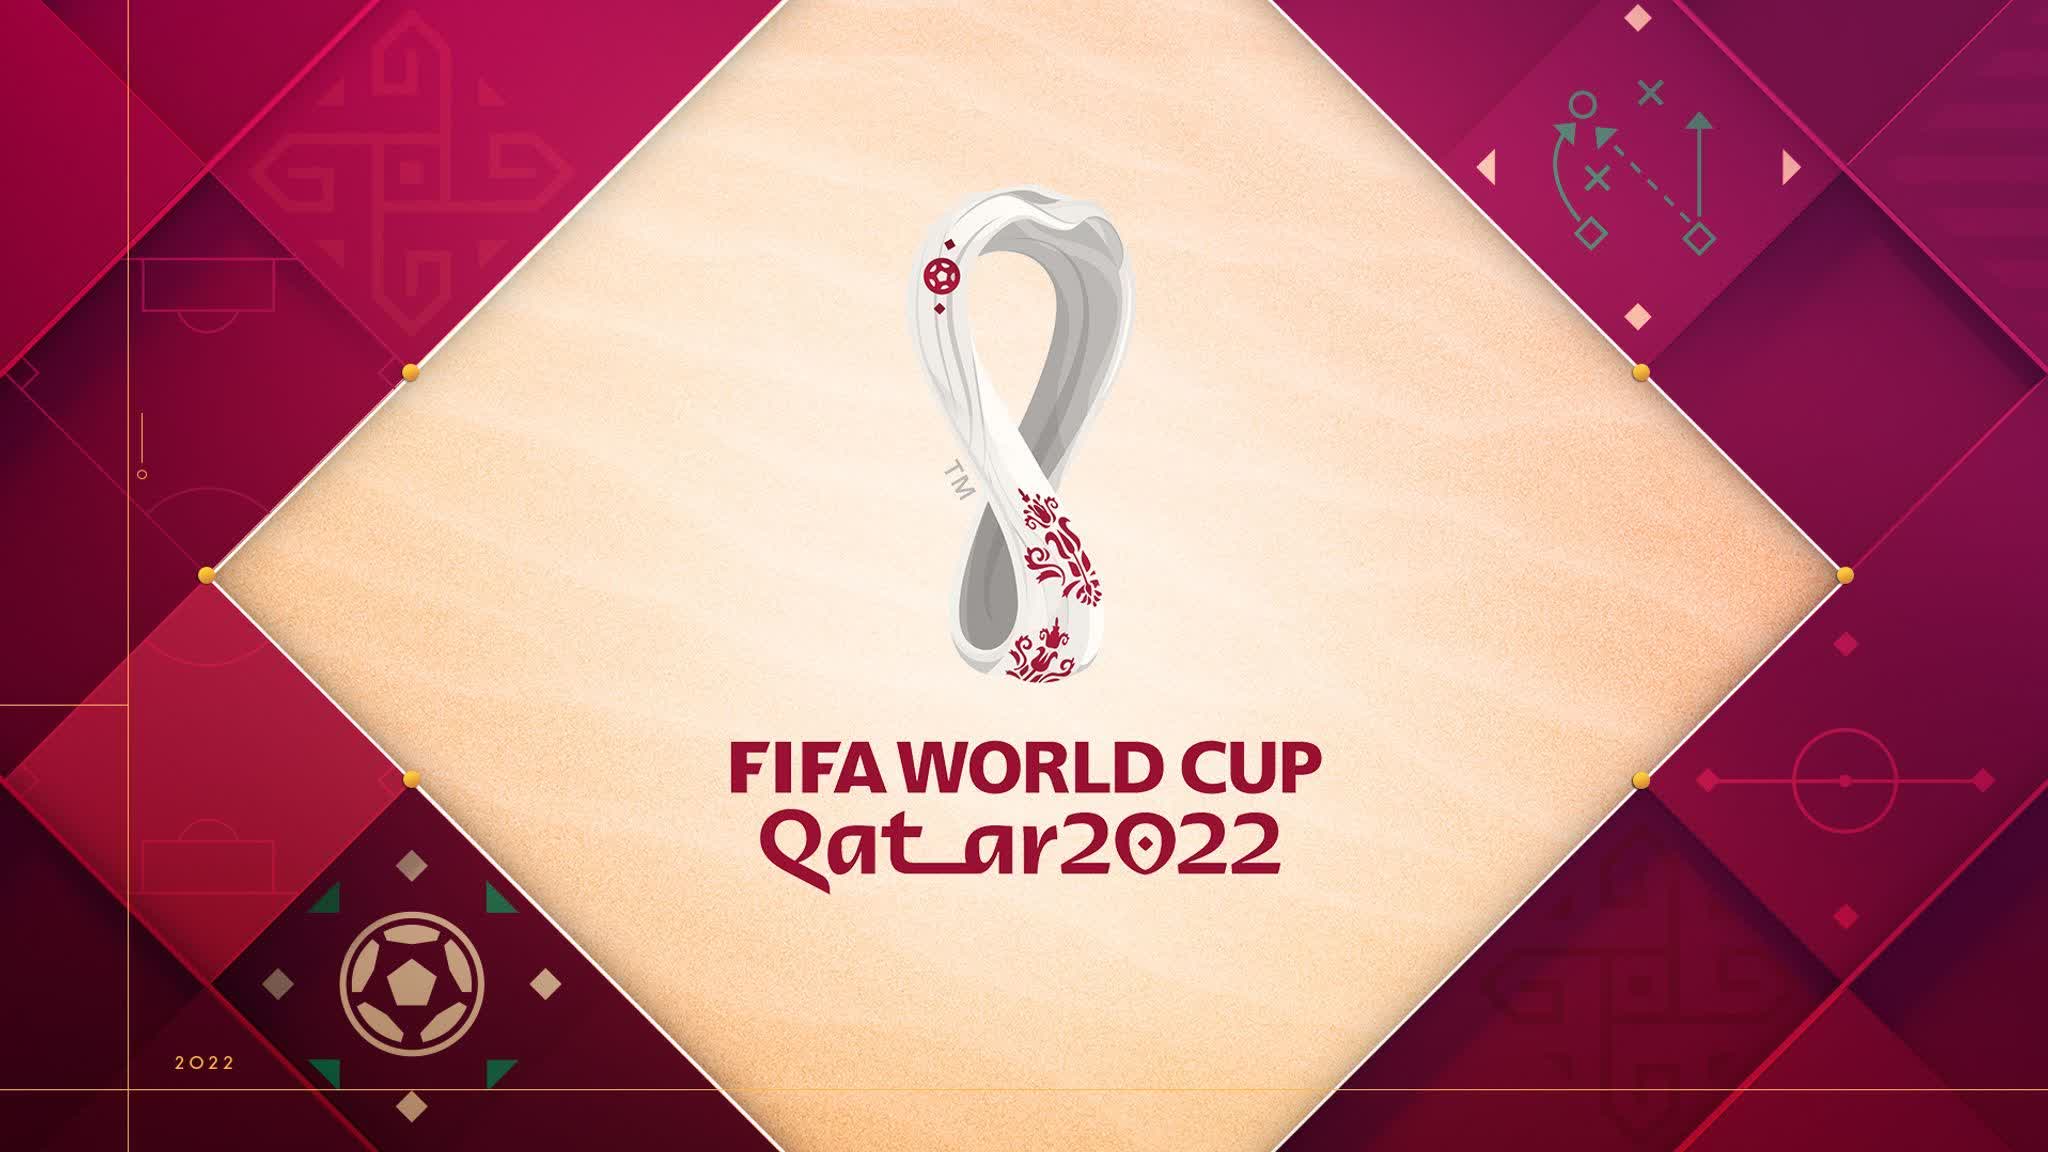 Qatar 'requires' World Cup visitors to install state-sponsored 'spyware' on their phones